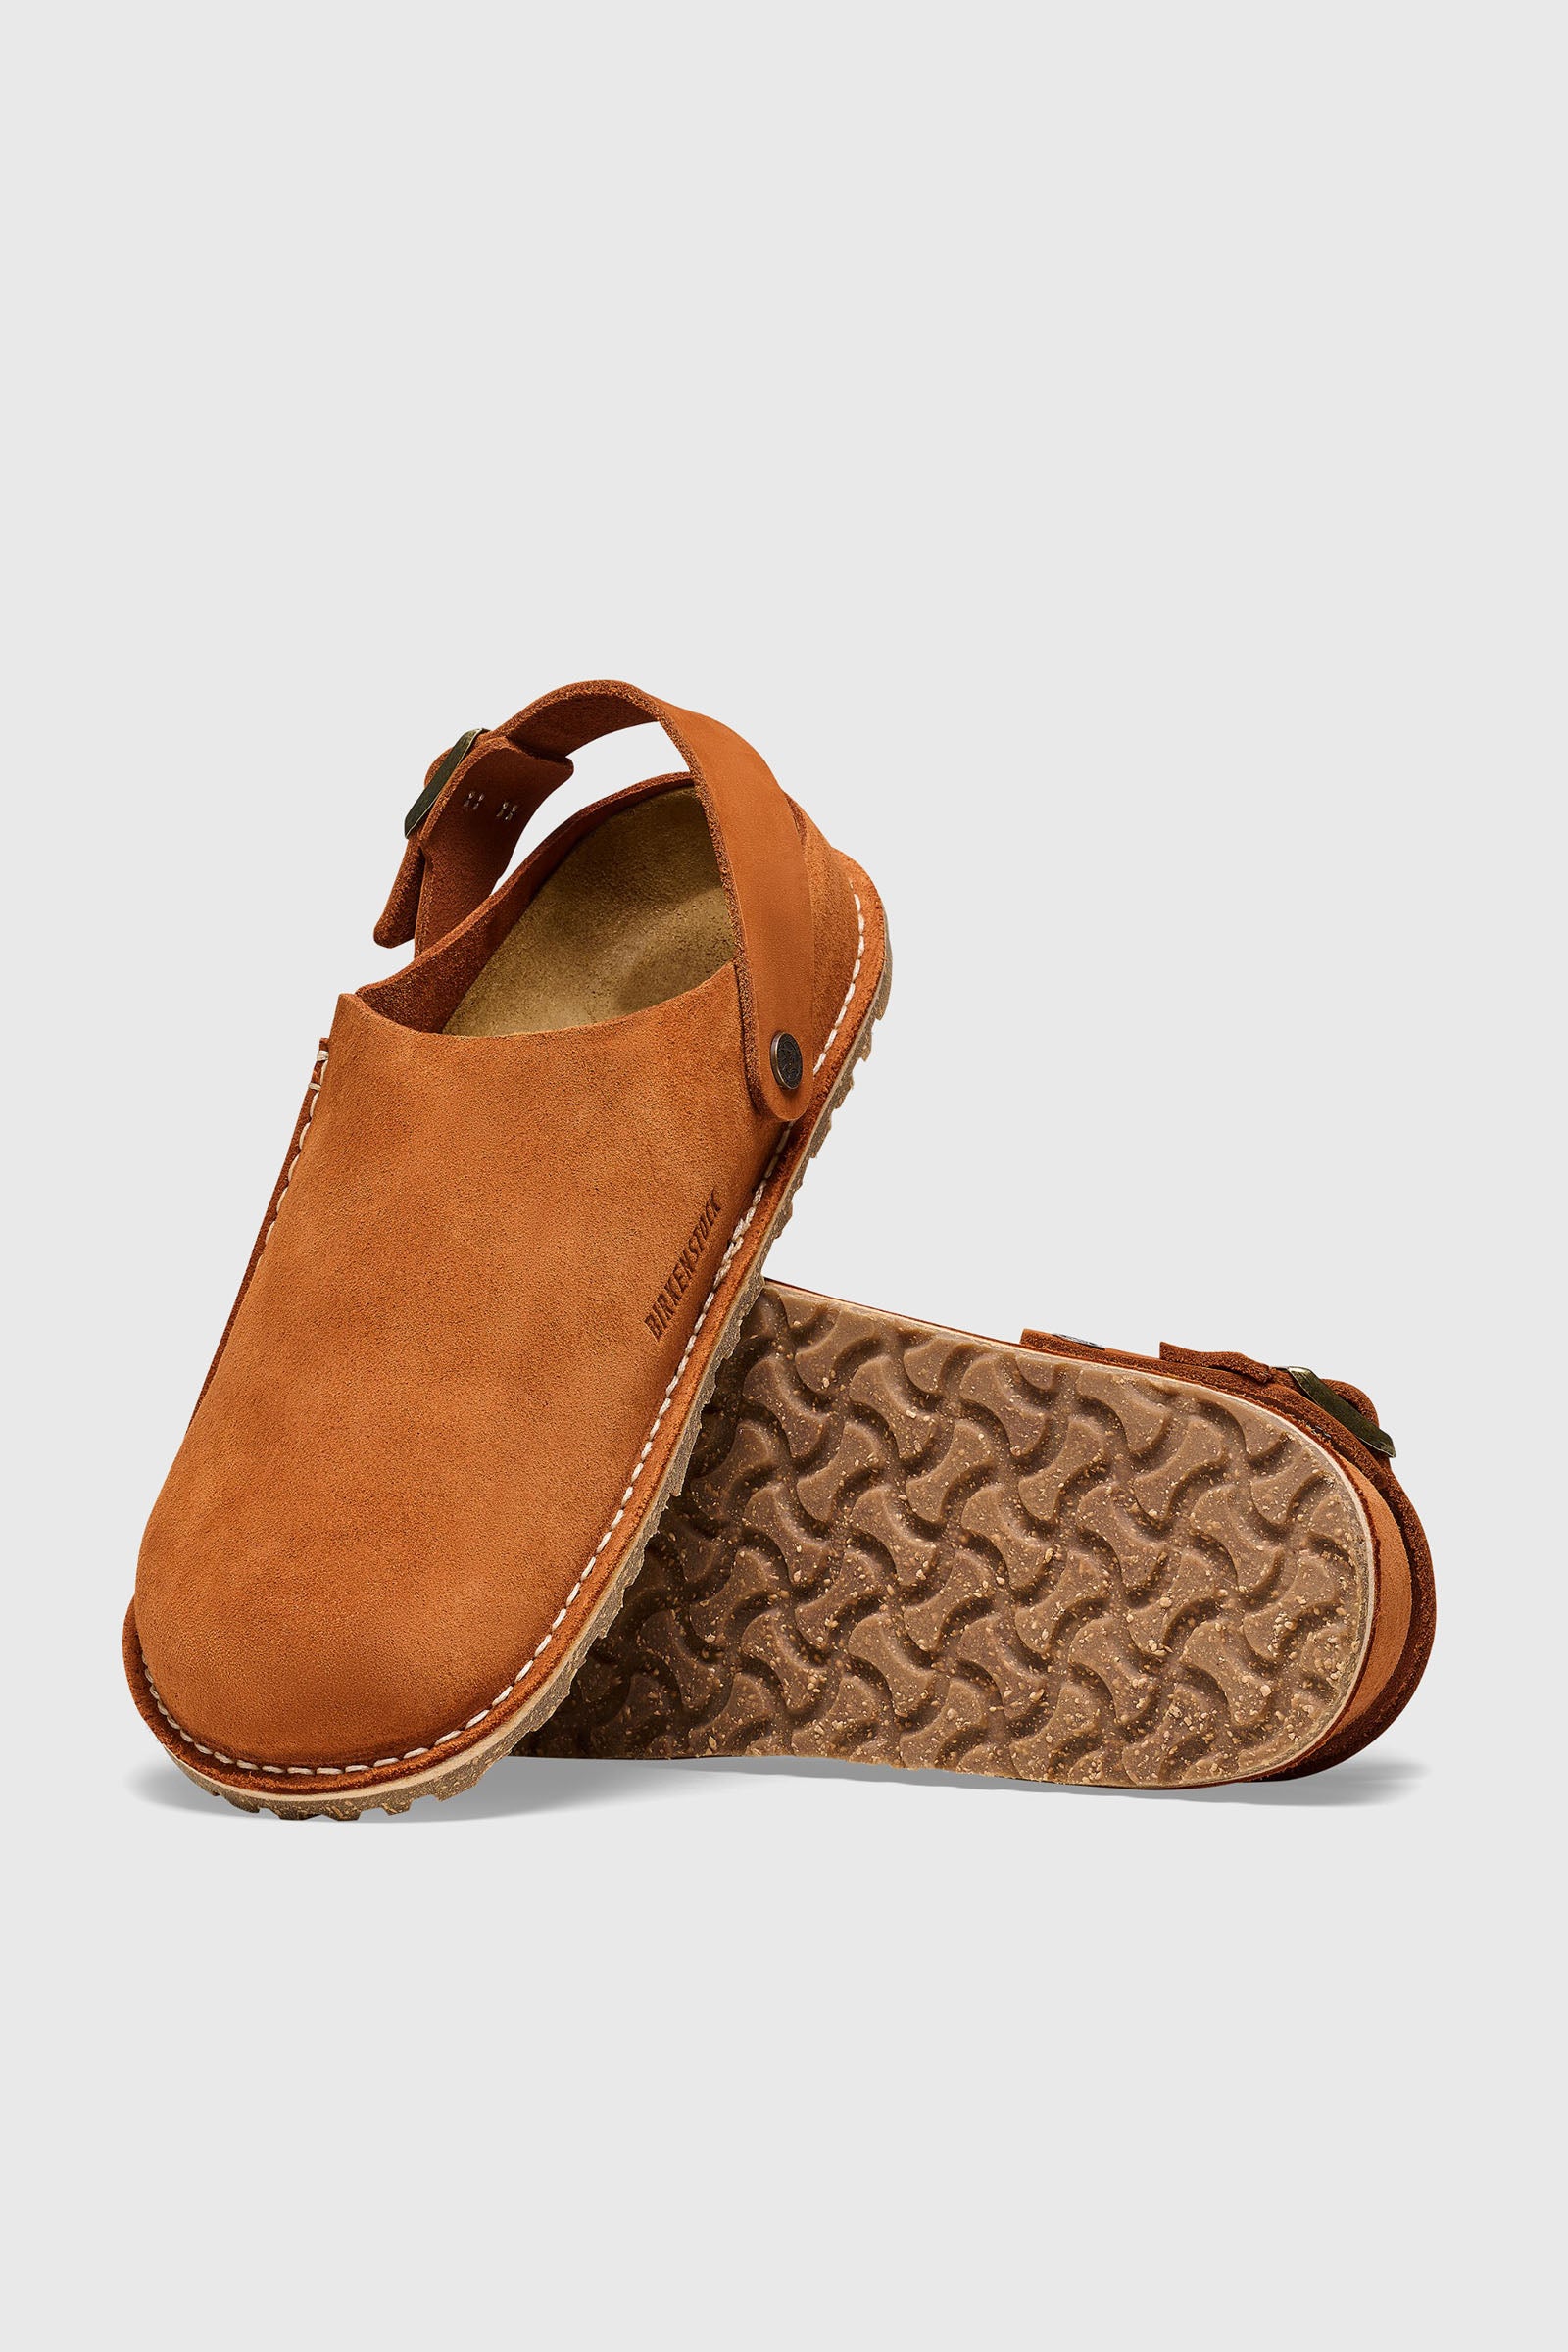 "Lutry Premium, Mink Suede Tobacco, in Brown Leather for Women" - 5